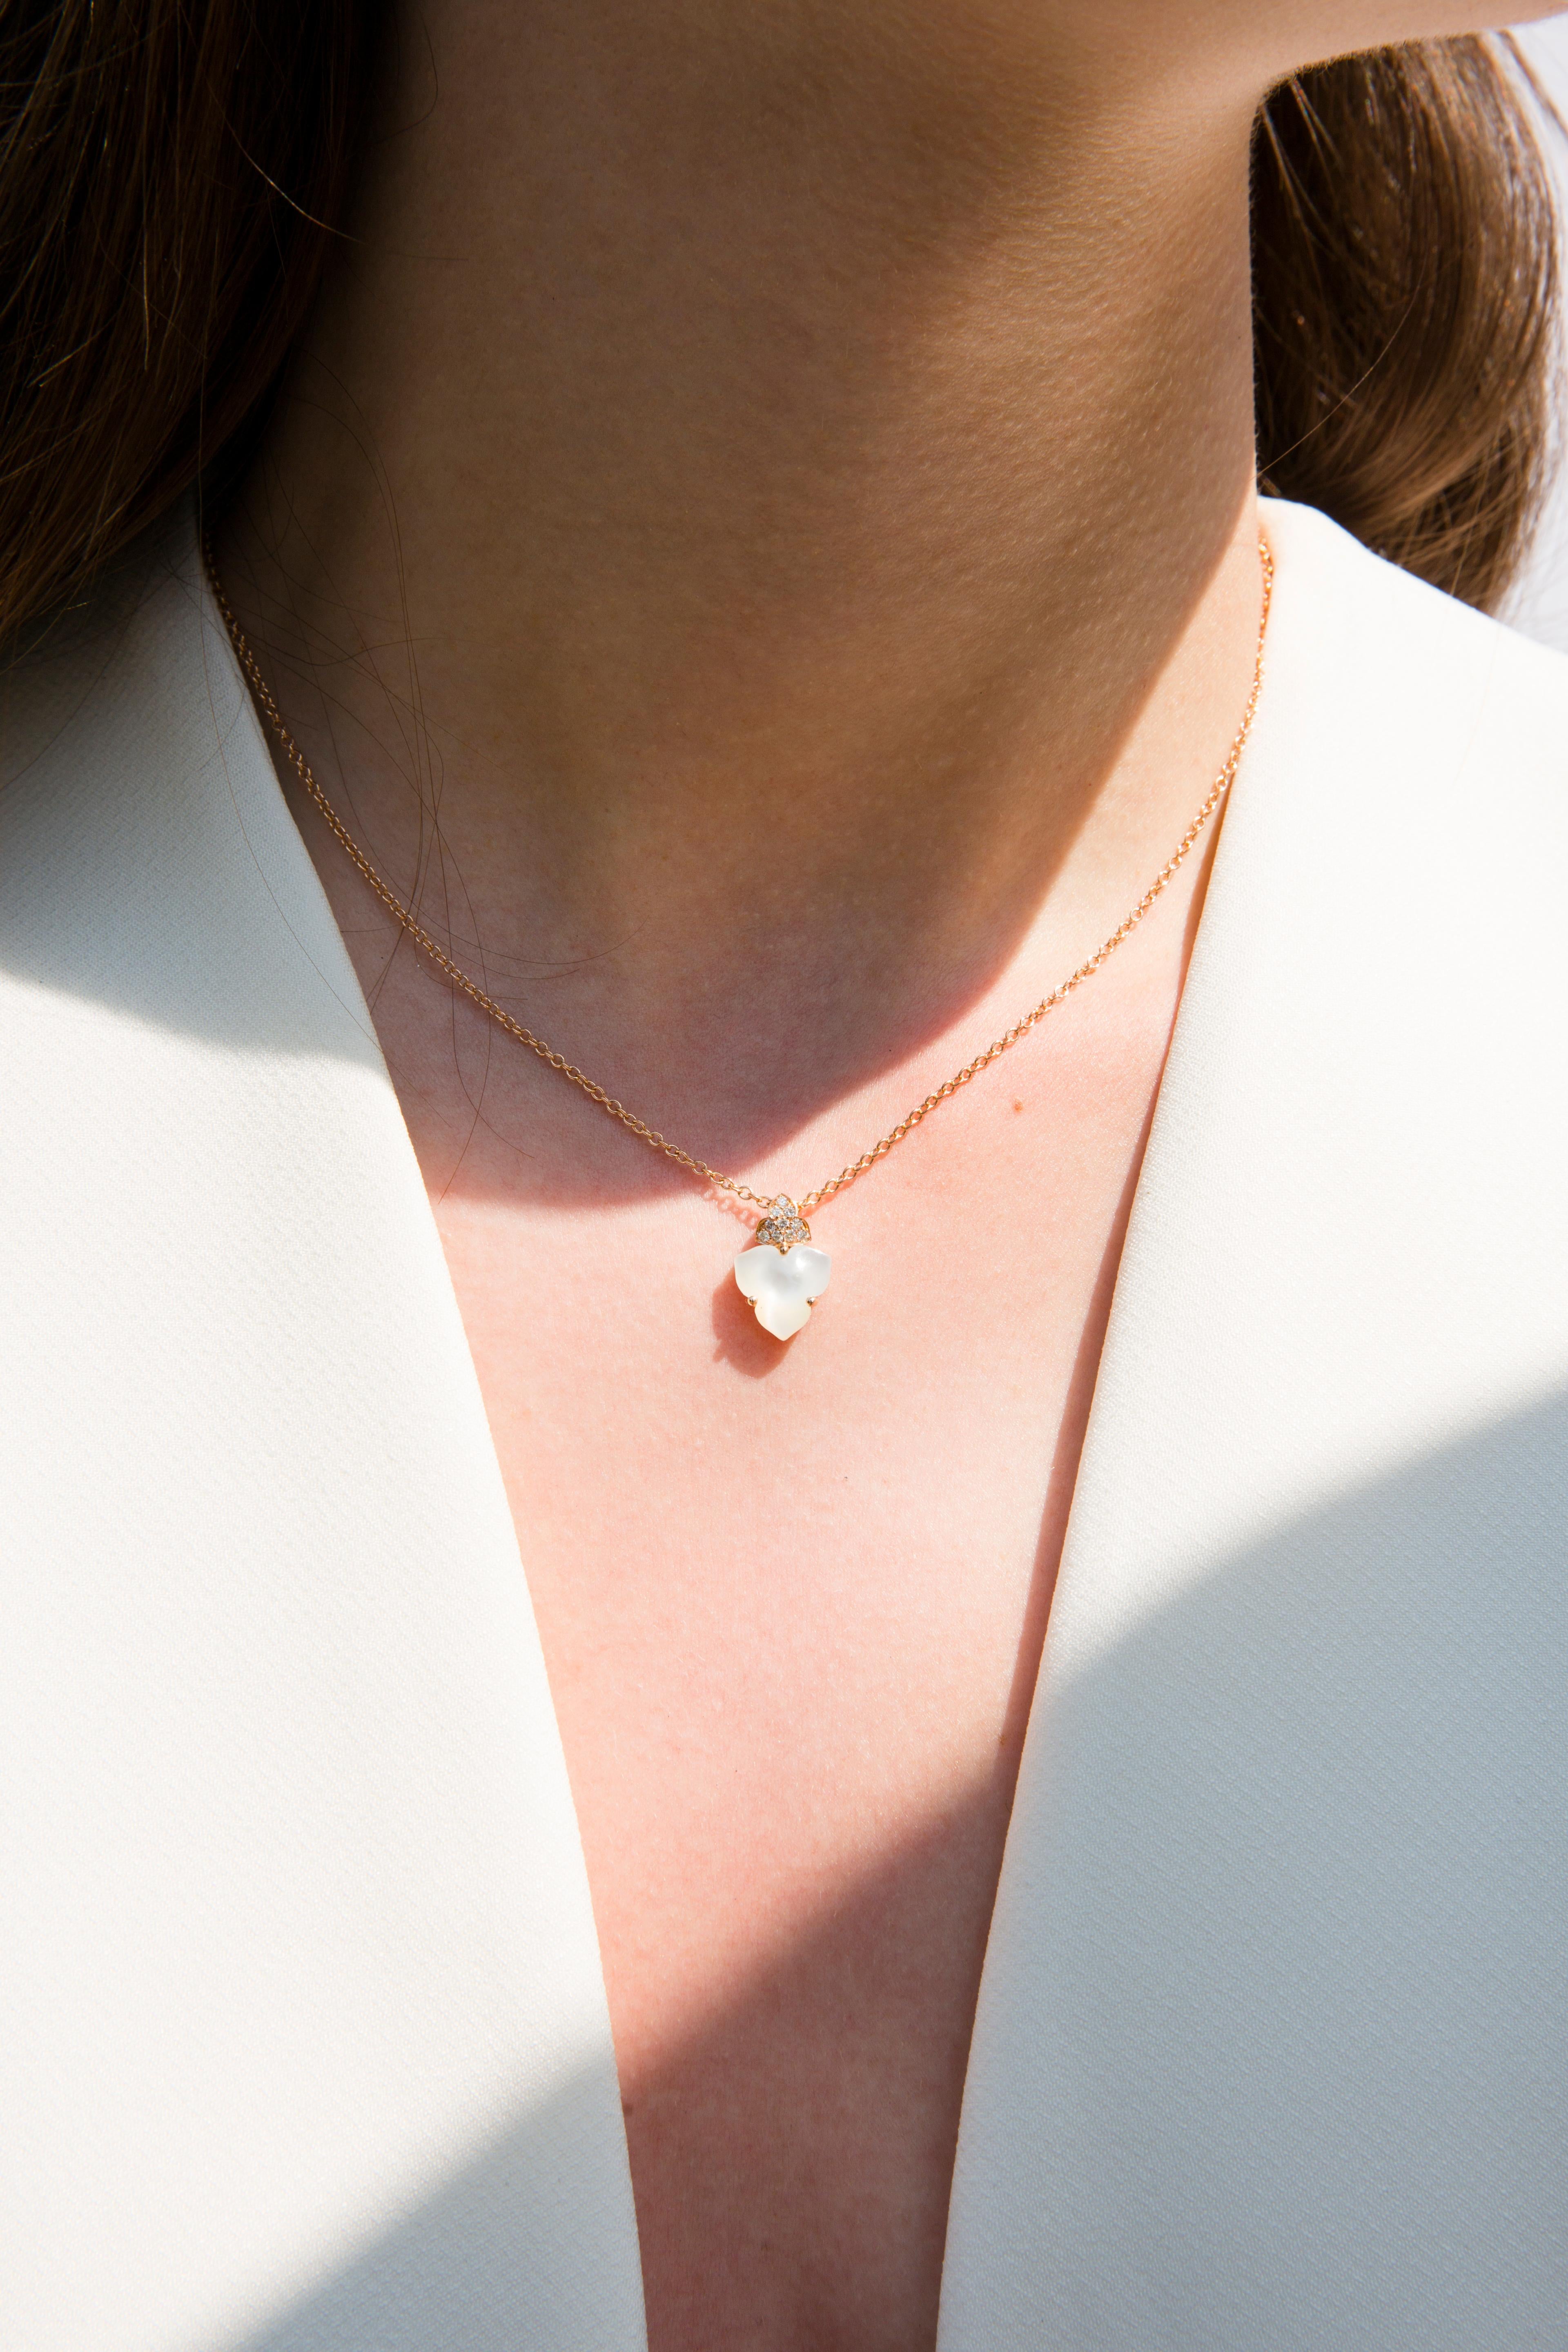 18 Carat Rose gold Round Brilliant Cut Diamonds and Mother of Pearl Pendant Necklace featuring 0,10 carats of white diamonds and natural mother of pearl. Adjustable chain from 42 cm to 39,5 cm.
Handmade in Italy. Ready in stock.
Each Luca Carati